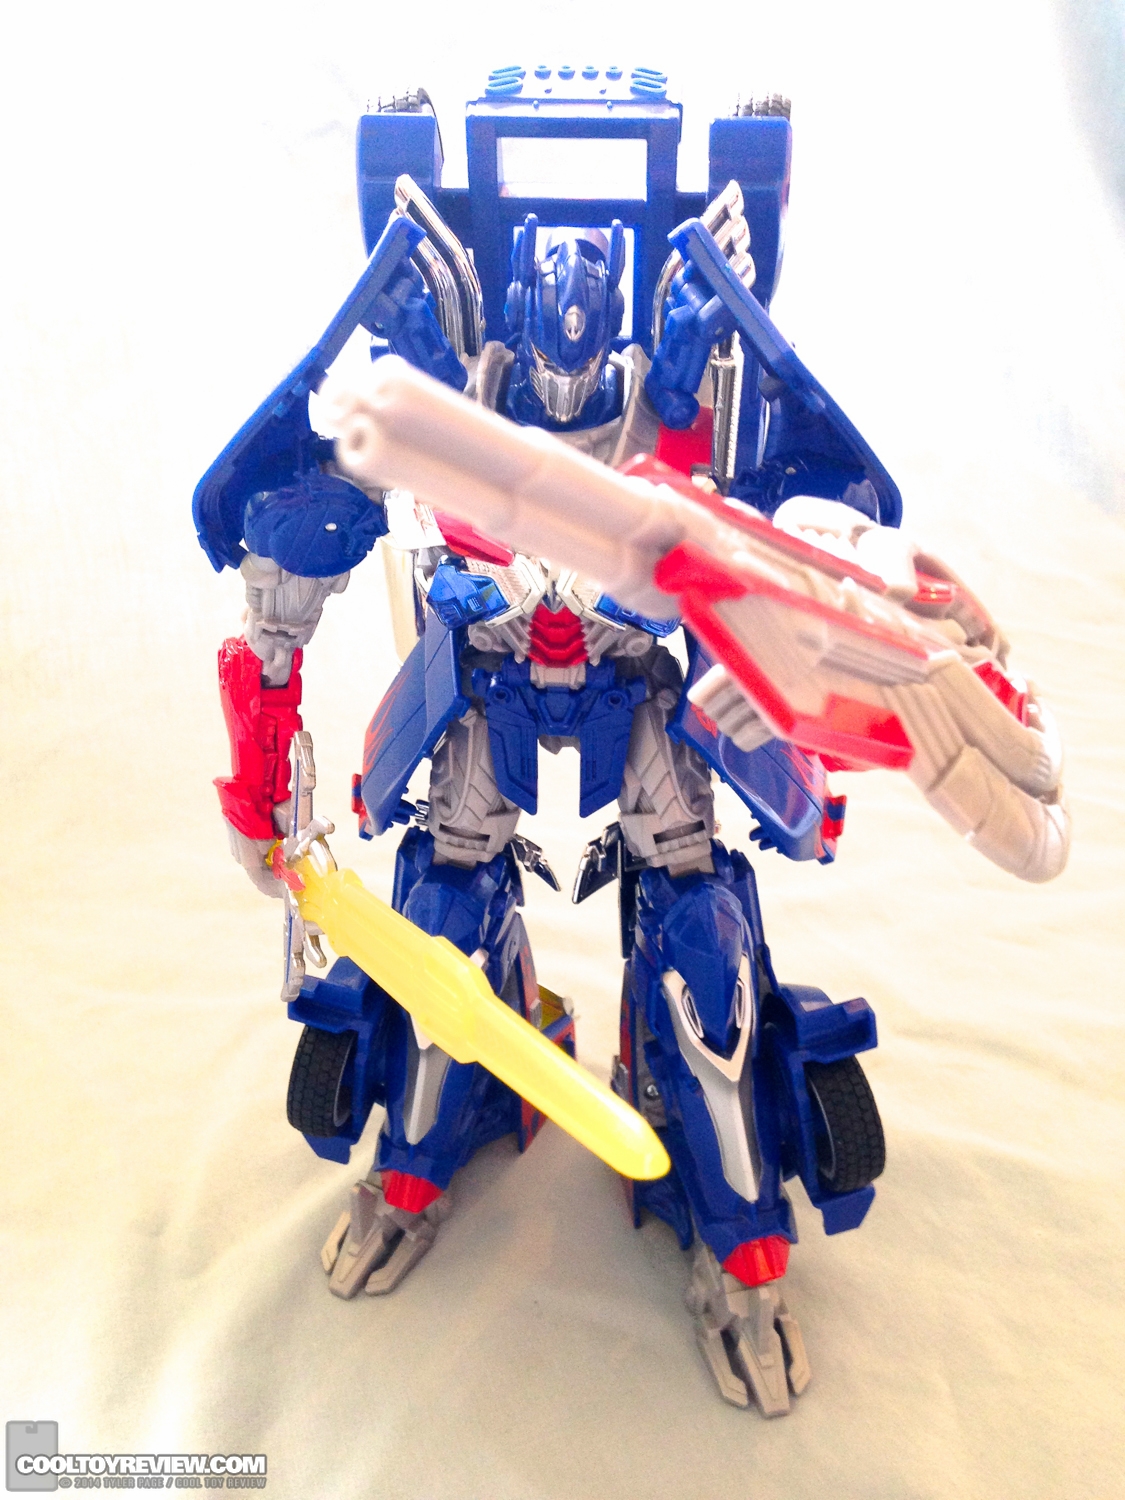 Transformers-Age-of-Extinction-Hasbro-Action-Figures-Review-019.jpg